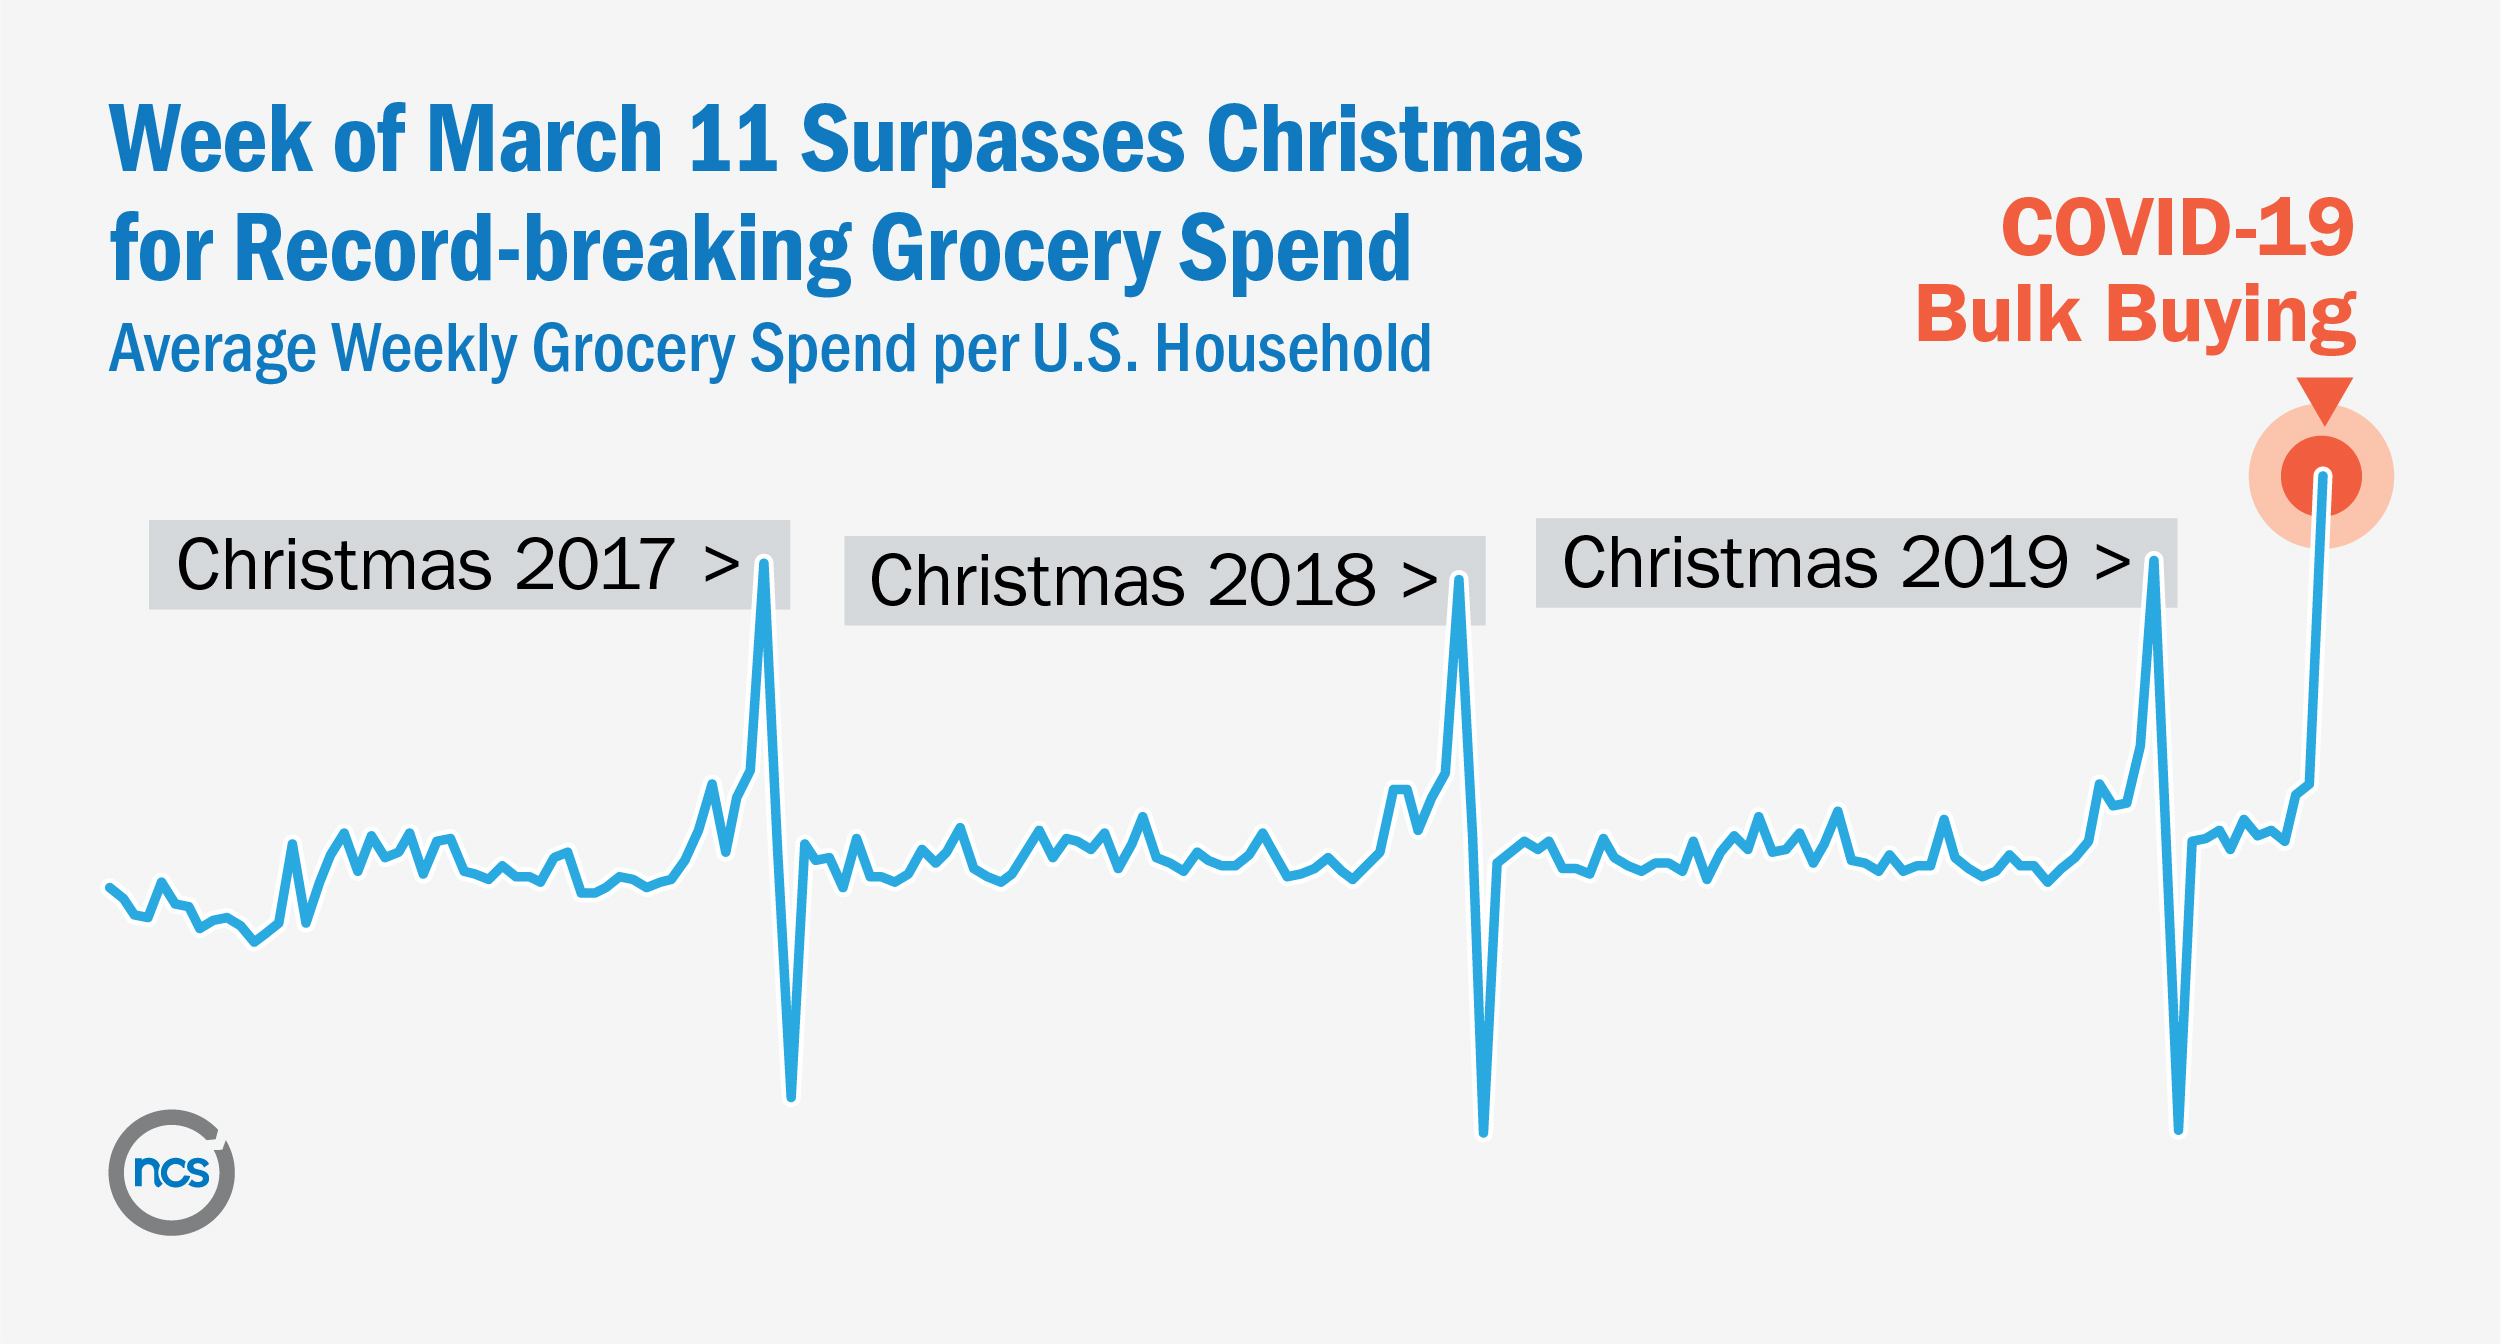 Week of March 11, 2020 surpasses Christmas for record-breaking grocery spend.